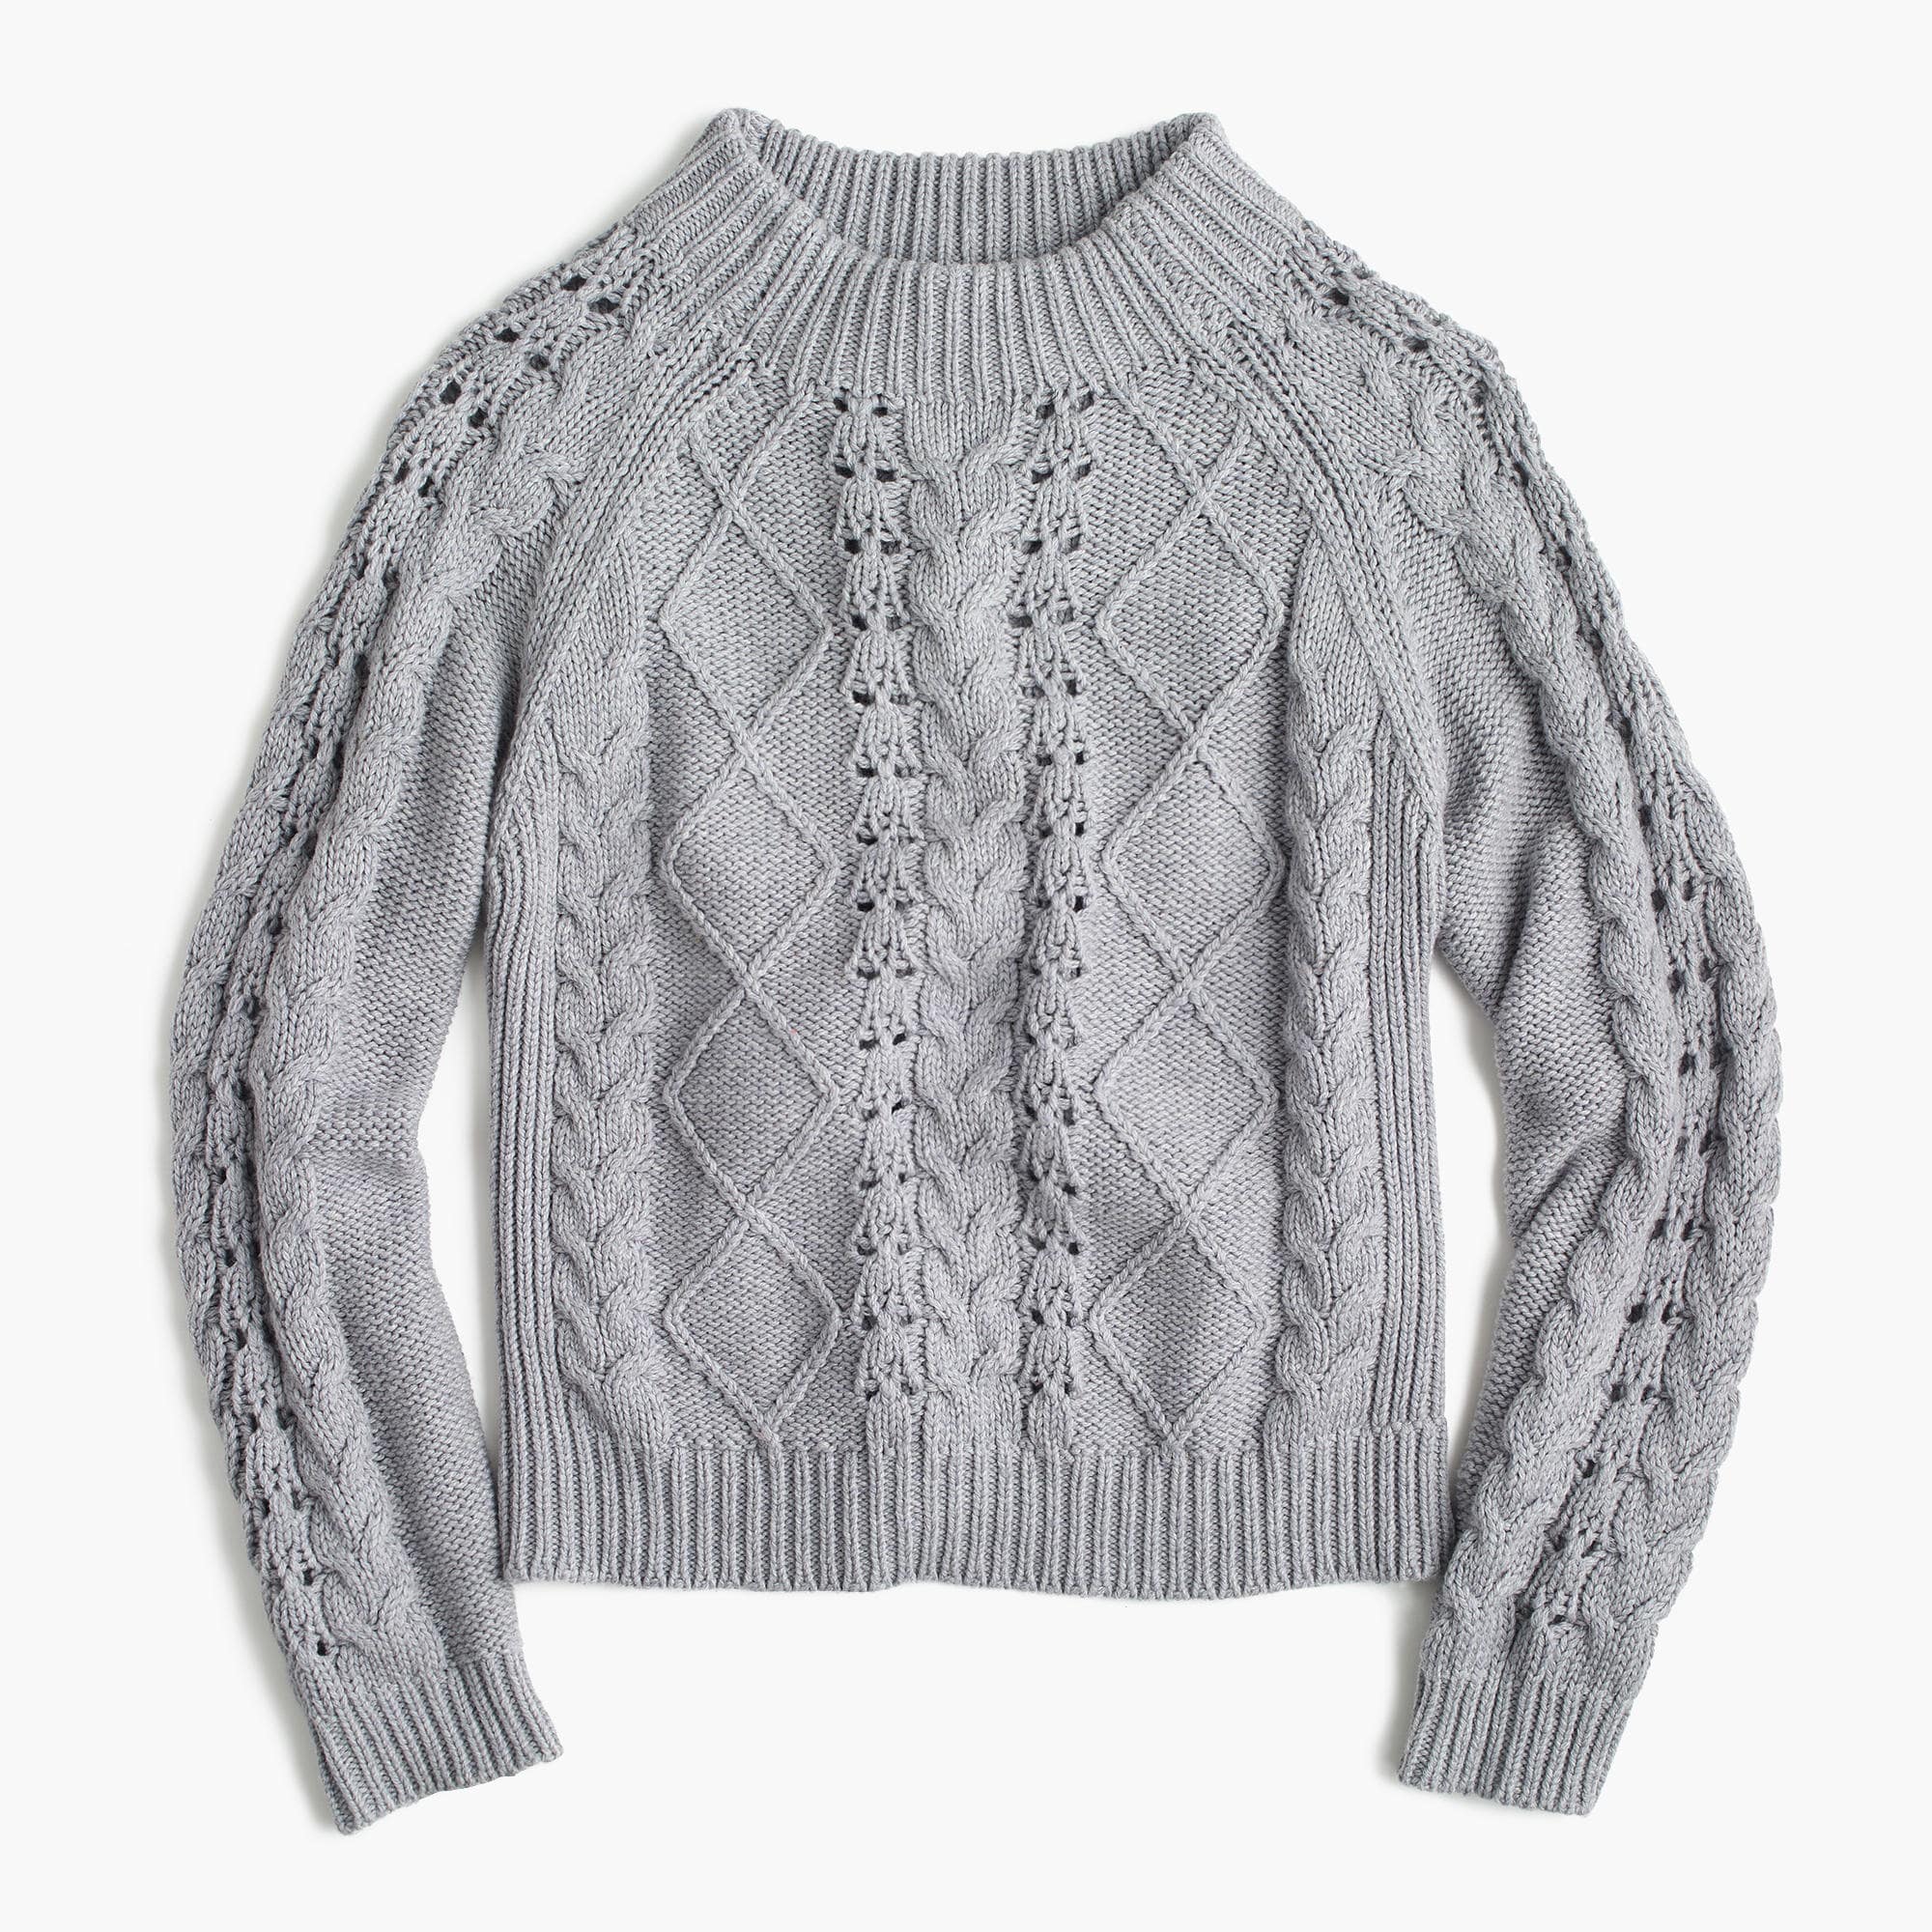 J.CREW CABLE KNIT SWEATER